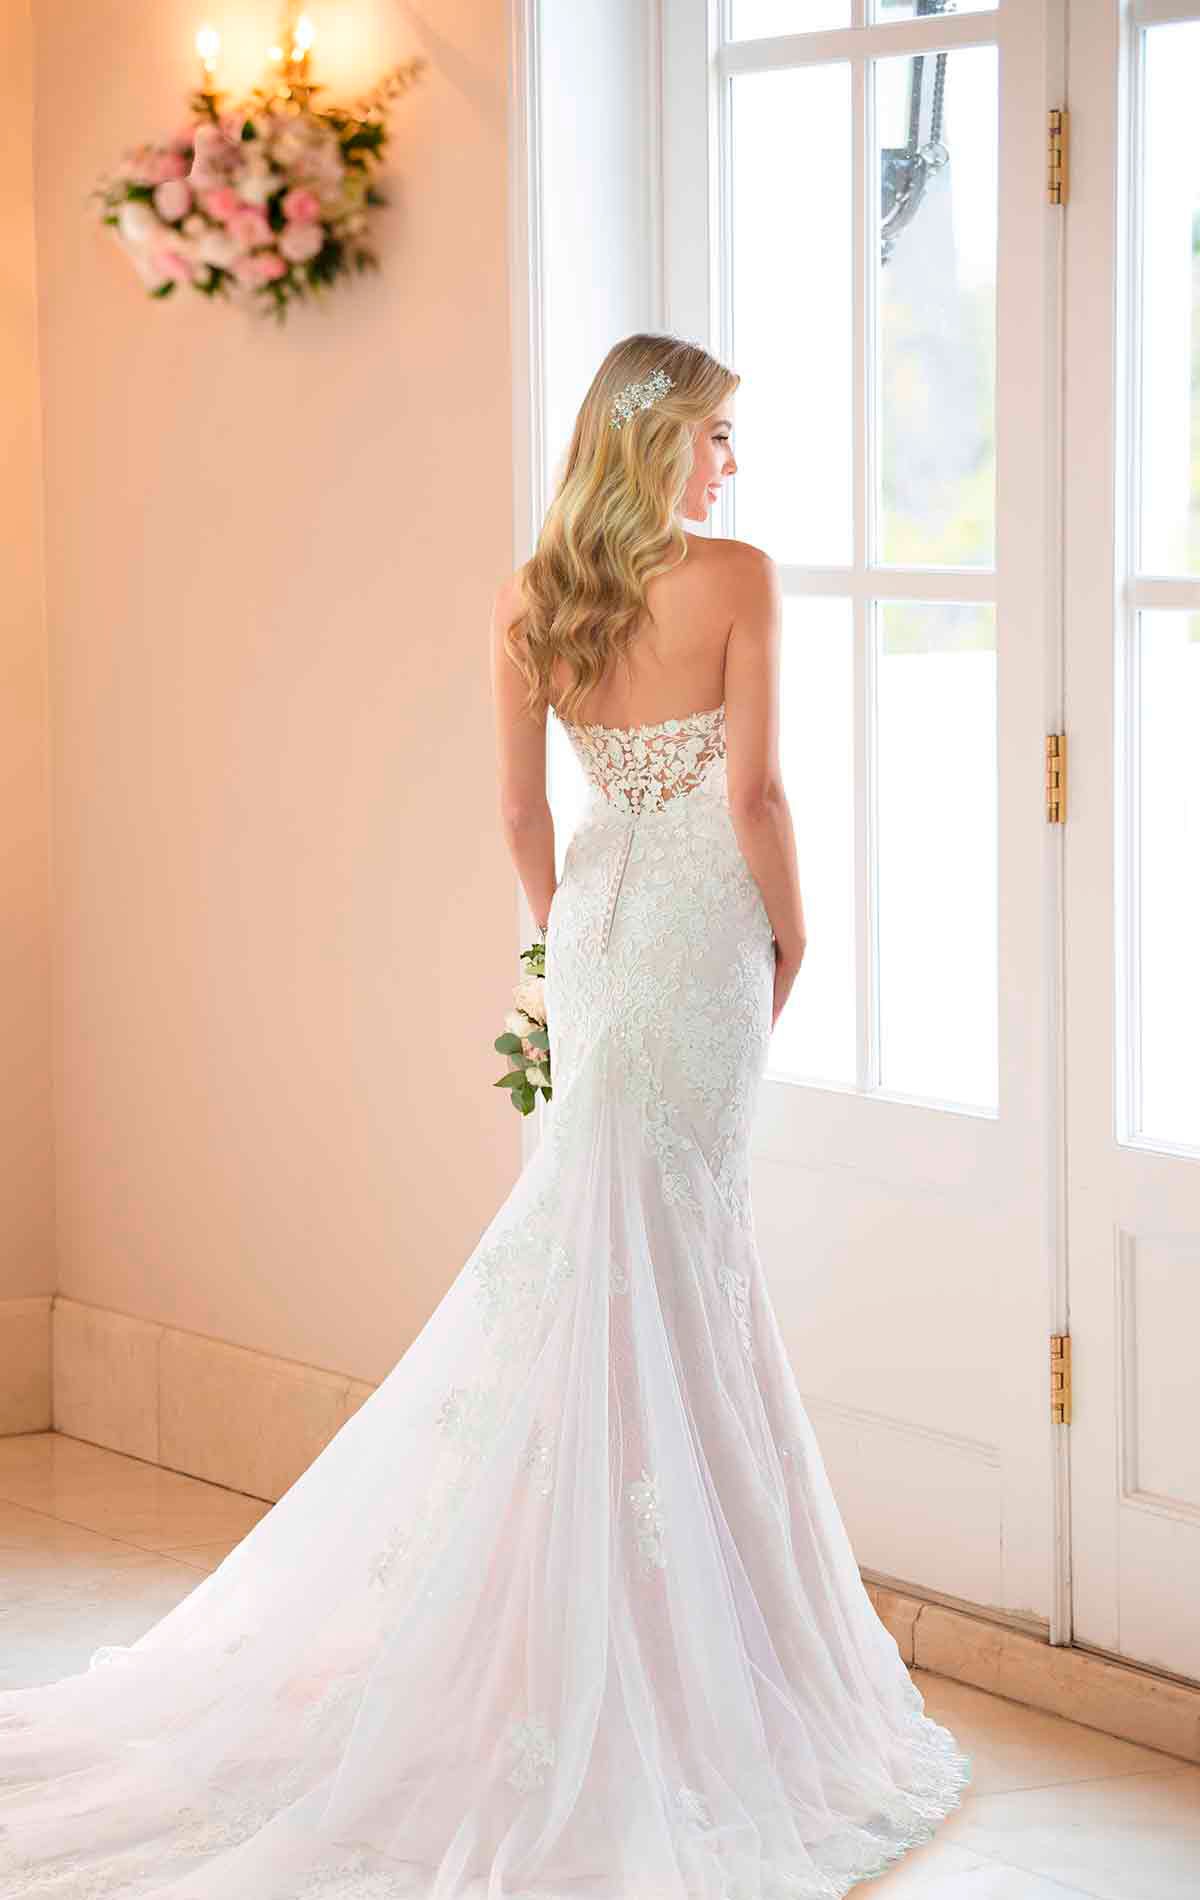 6814 - Sottero Size 12 Petite - Stella York Wedding Dress 6814, Fitted lace wedding dress with sweetheart neckline.  Romantic  fit and flare Stella York designs at Blessings Wedding Dress shop Brighton, E, Sussex. BN1 5GG. Telephone: 01273 505766